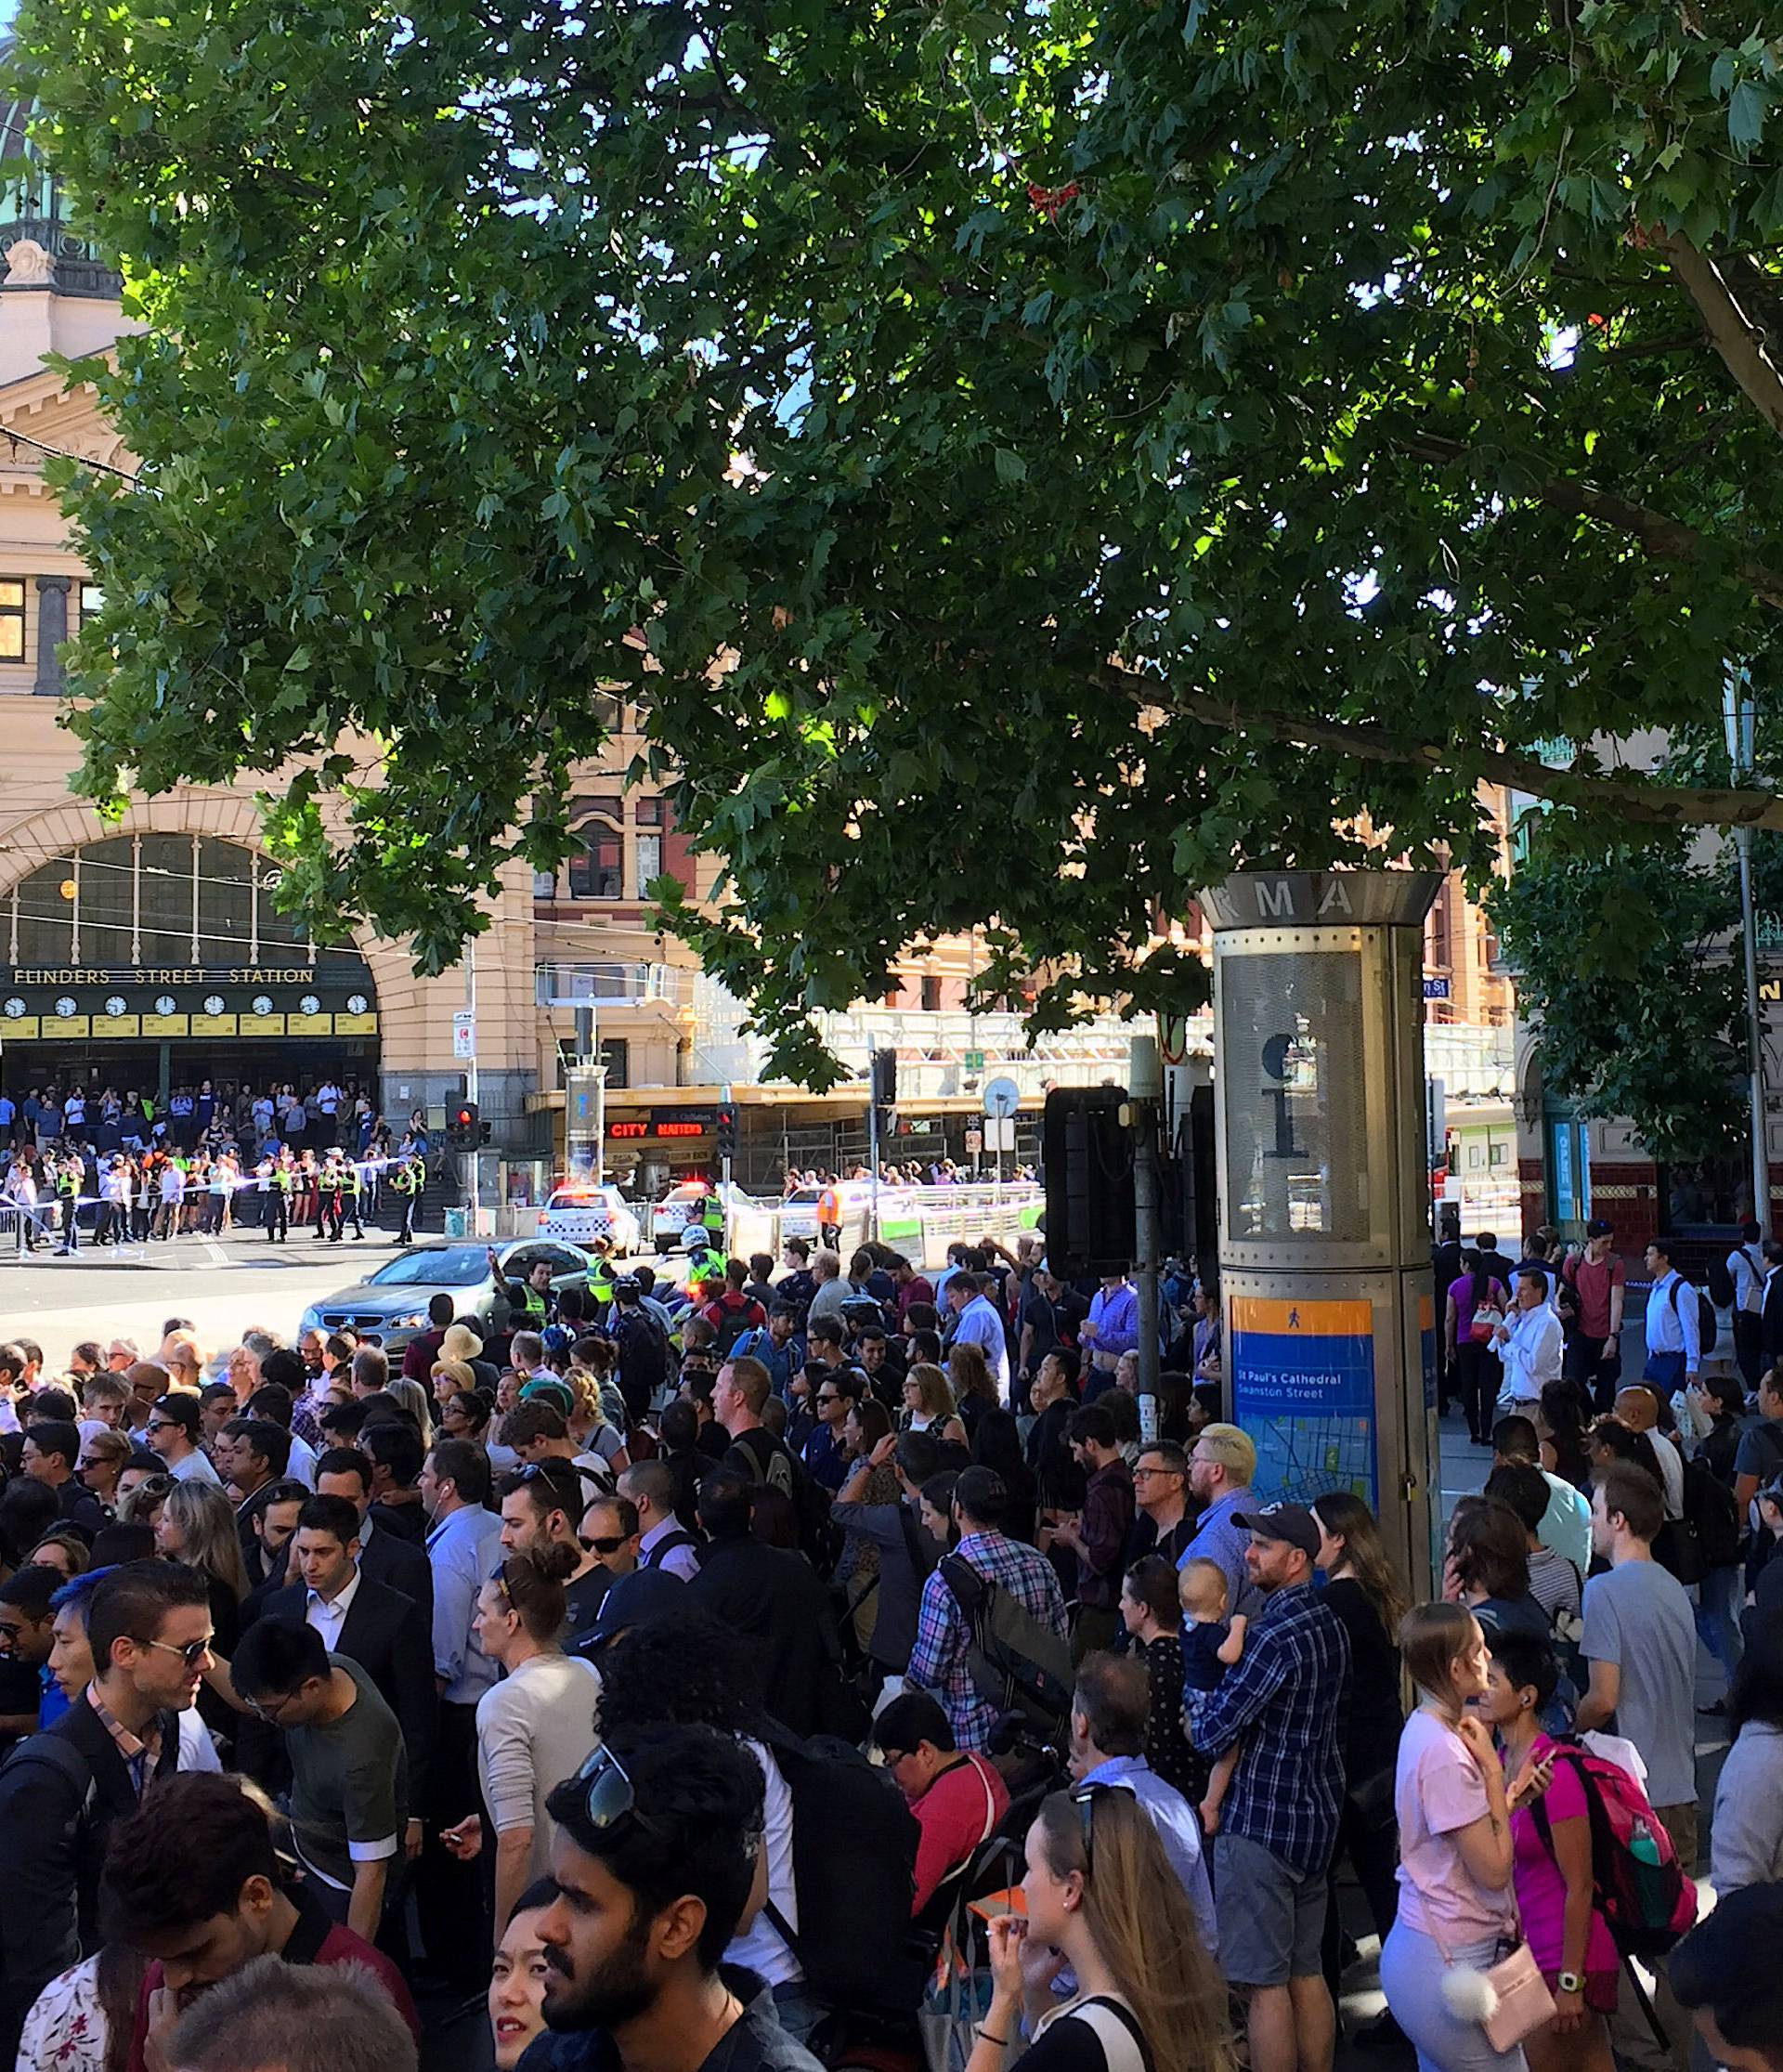 Members of the public stand behind police tape after Australian police said on Thursday they have arrested the driver of a vehicle that ploughed into pedestrians at a crowded intersection near the Flinders Street train station in central Melbourne